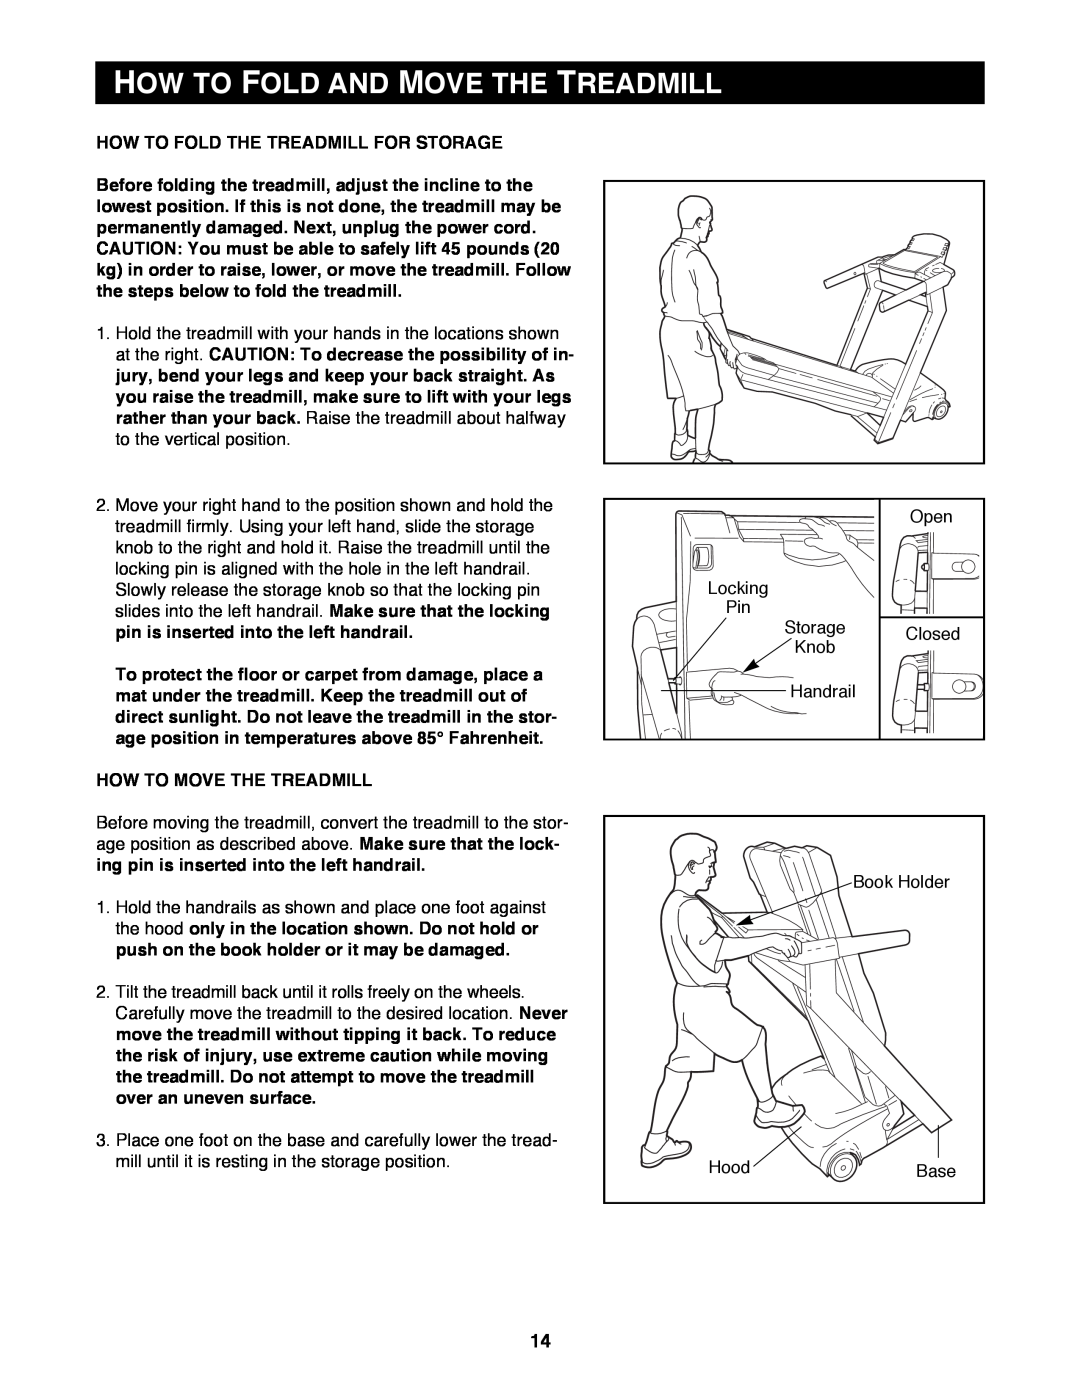 Reebok Fitness RBTL11981 manual How To Fold And Move The Treadmill, How To Fold The Treadmill For Storage 